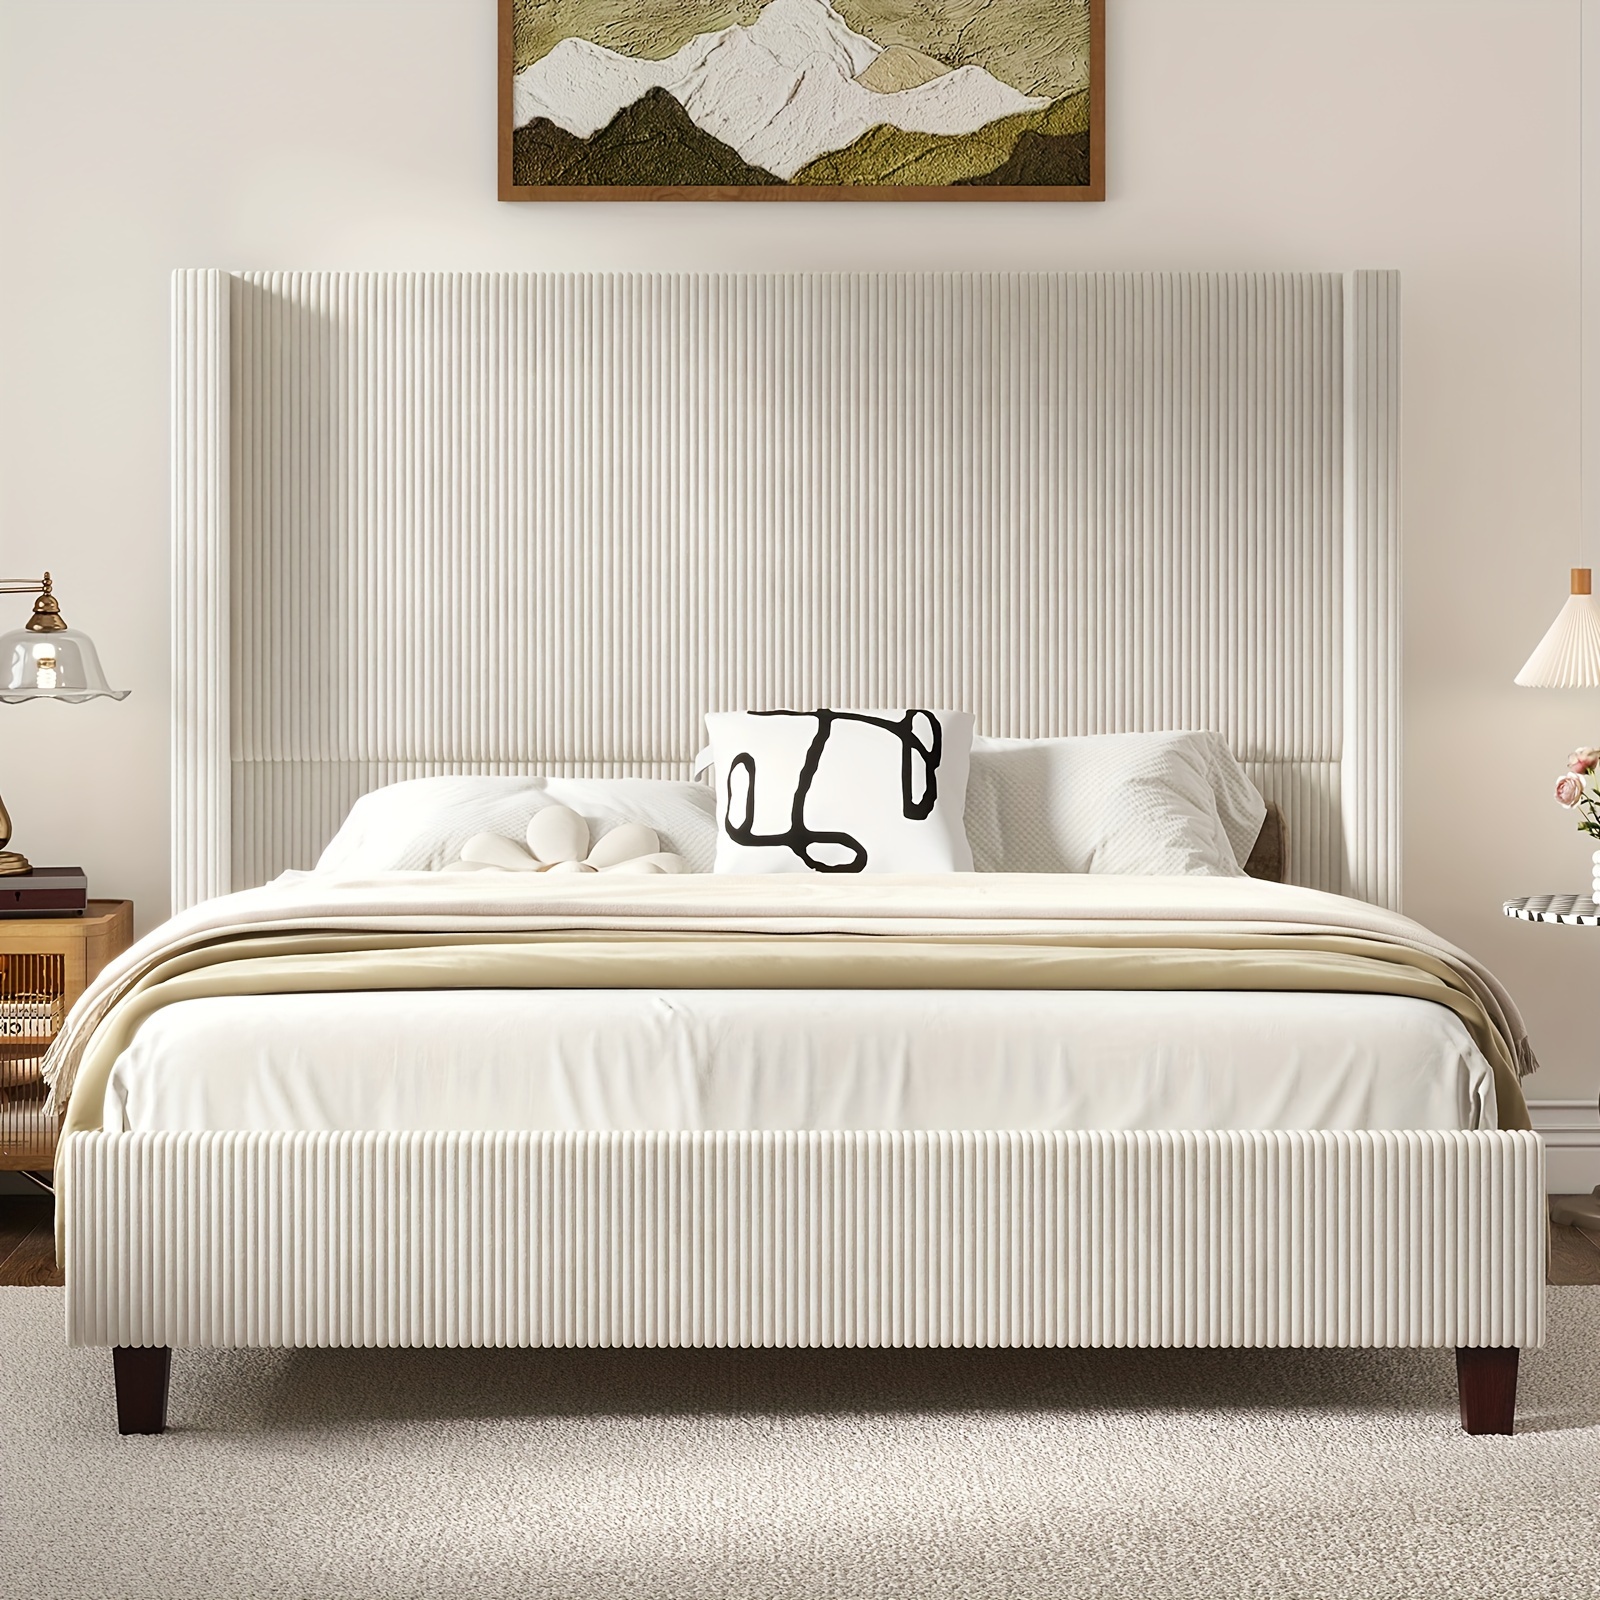 

Queen Size Bed Frame, 61" Corduroy Upholstered Bed Frame, Platform Bed With Vertical Stripe Wingback Headboard, No Box Spring Needed/solid Wood Slats & Legs Cream